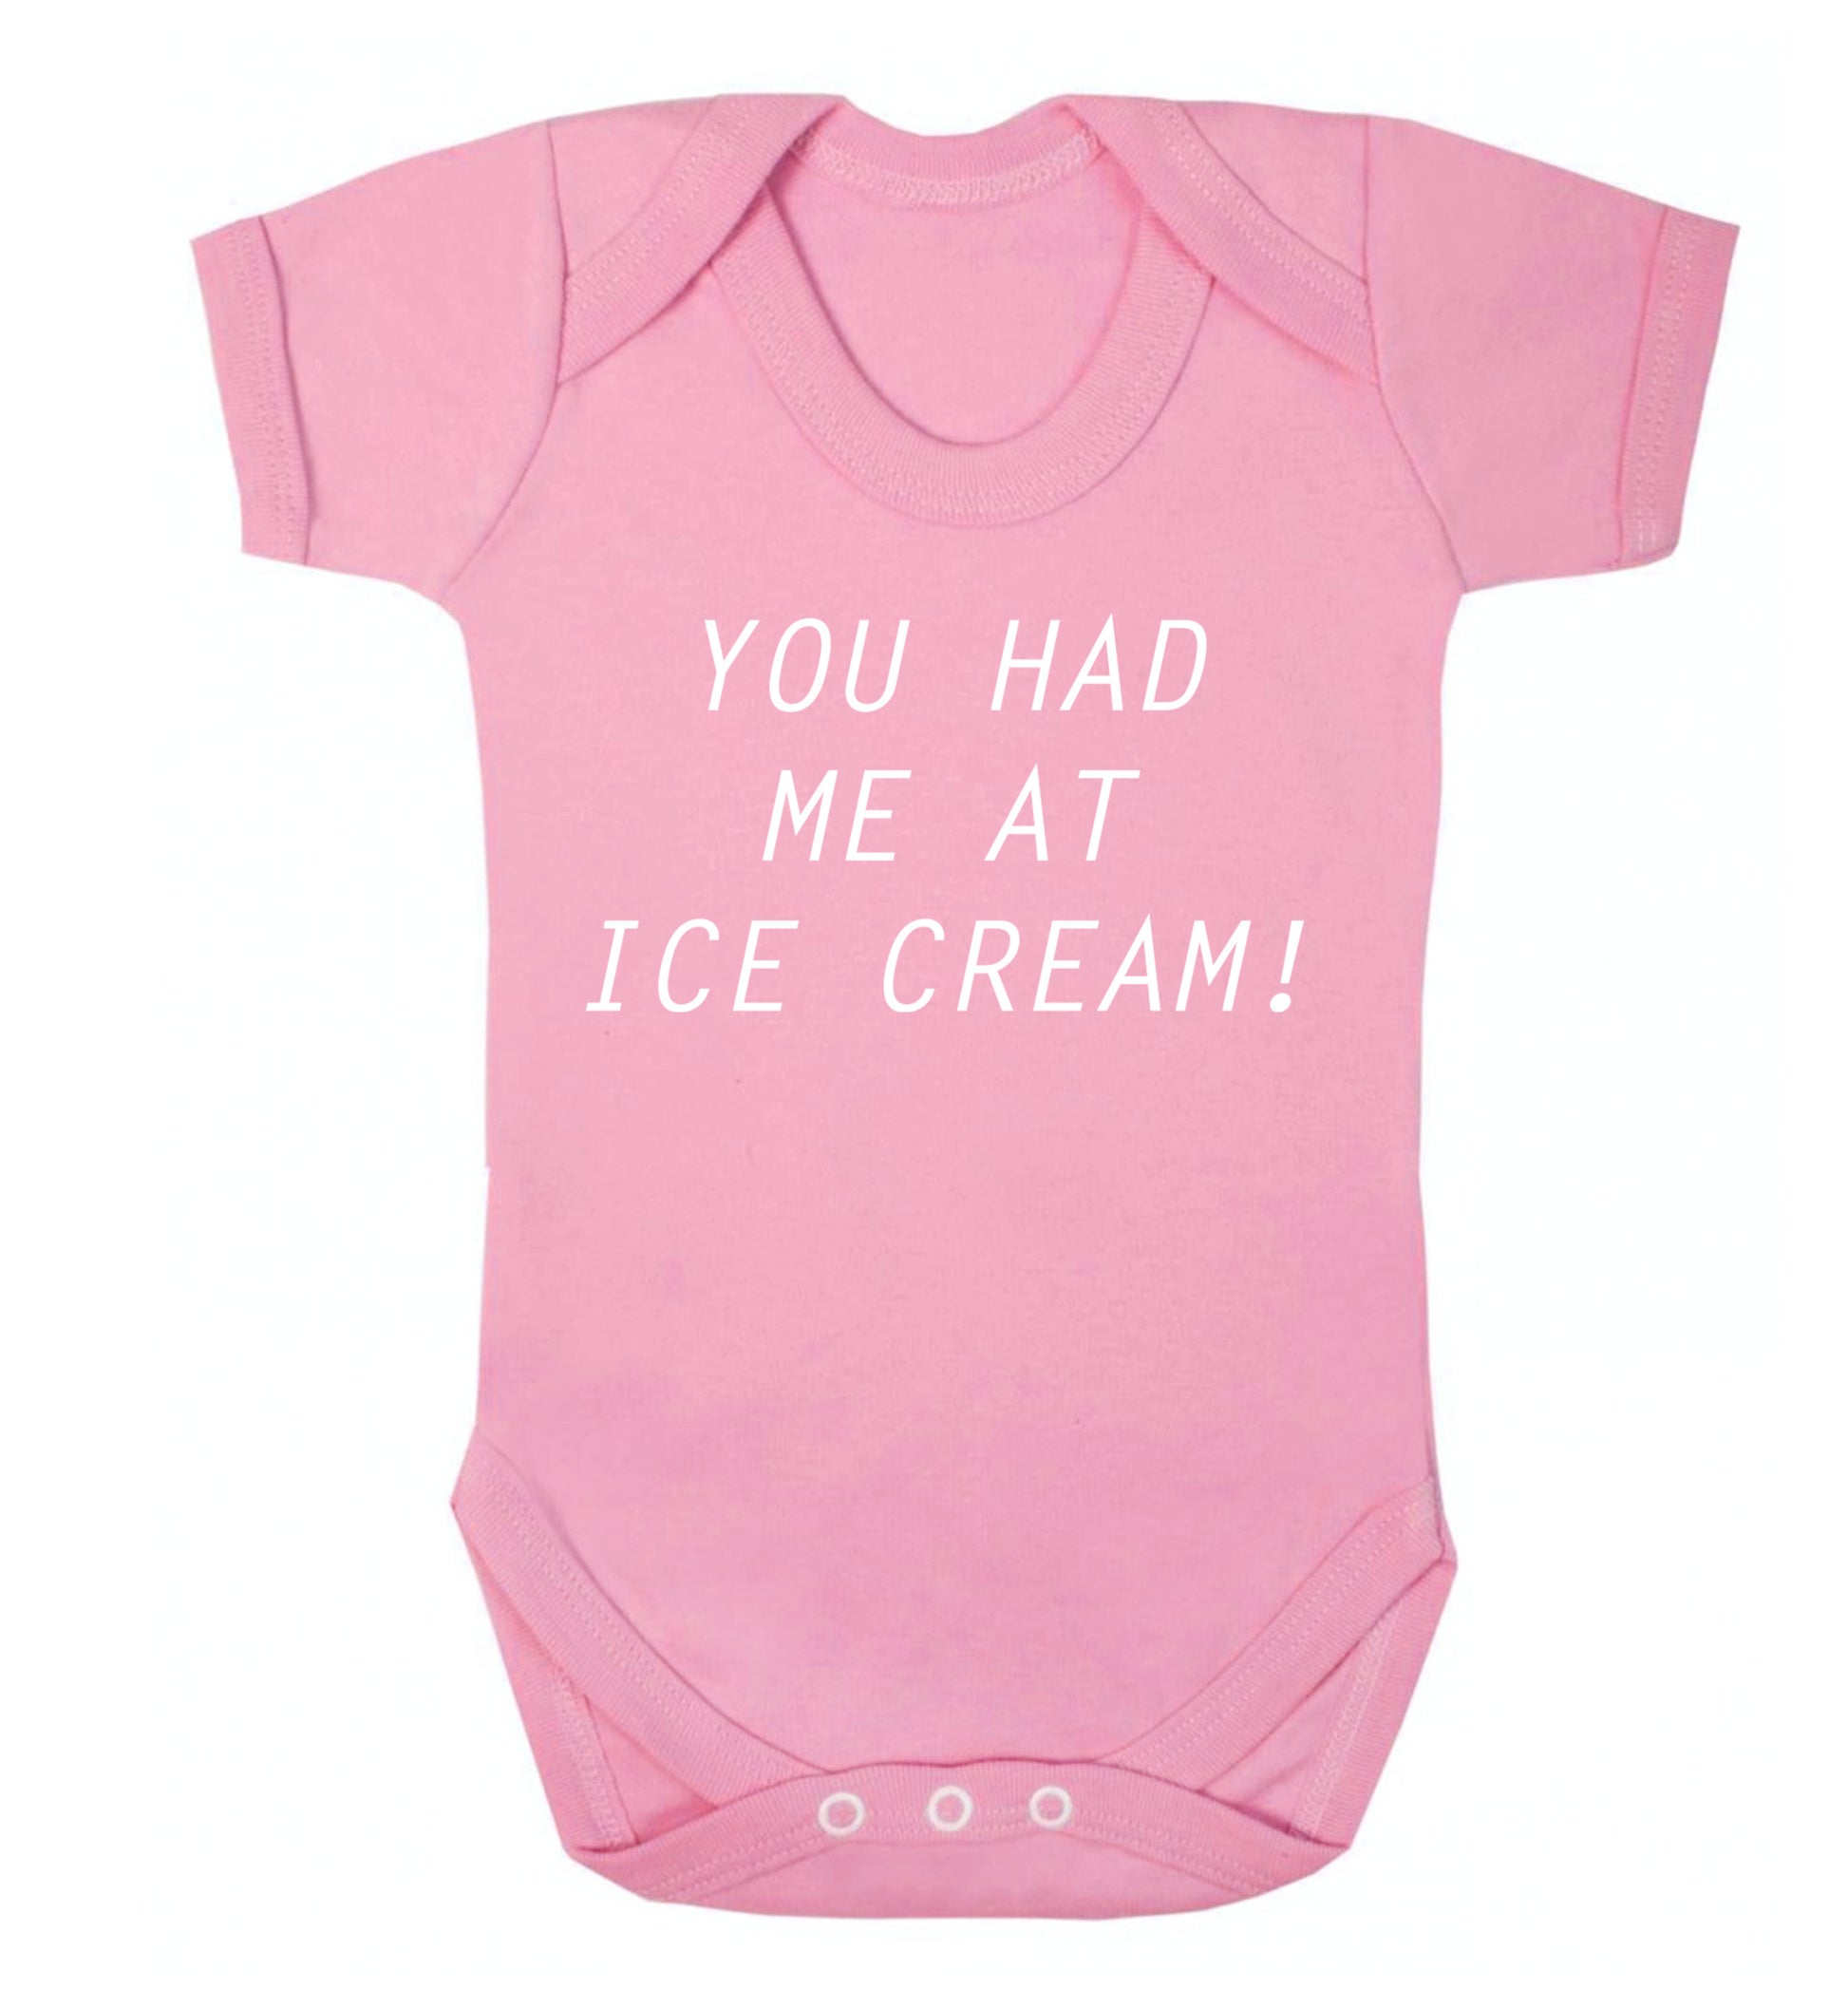 You had me at ice cream Baby Vest pale pink 18-24 months